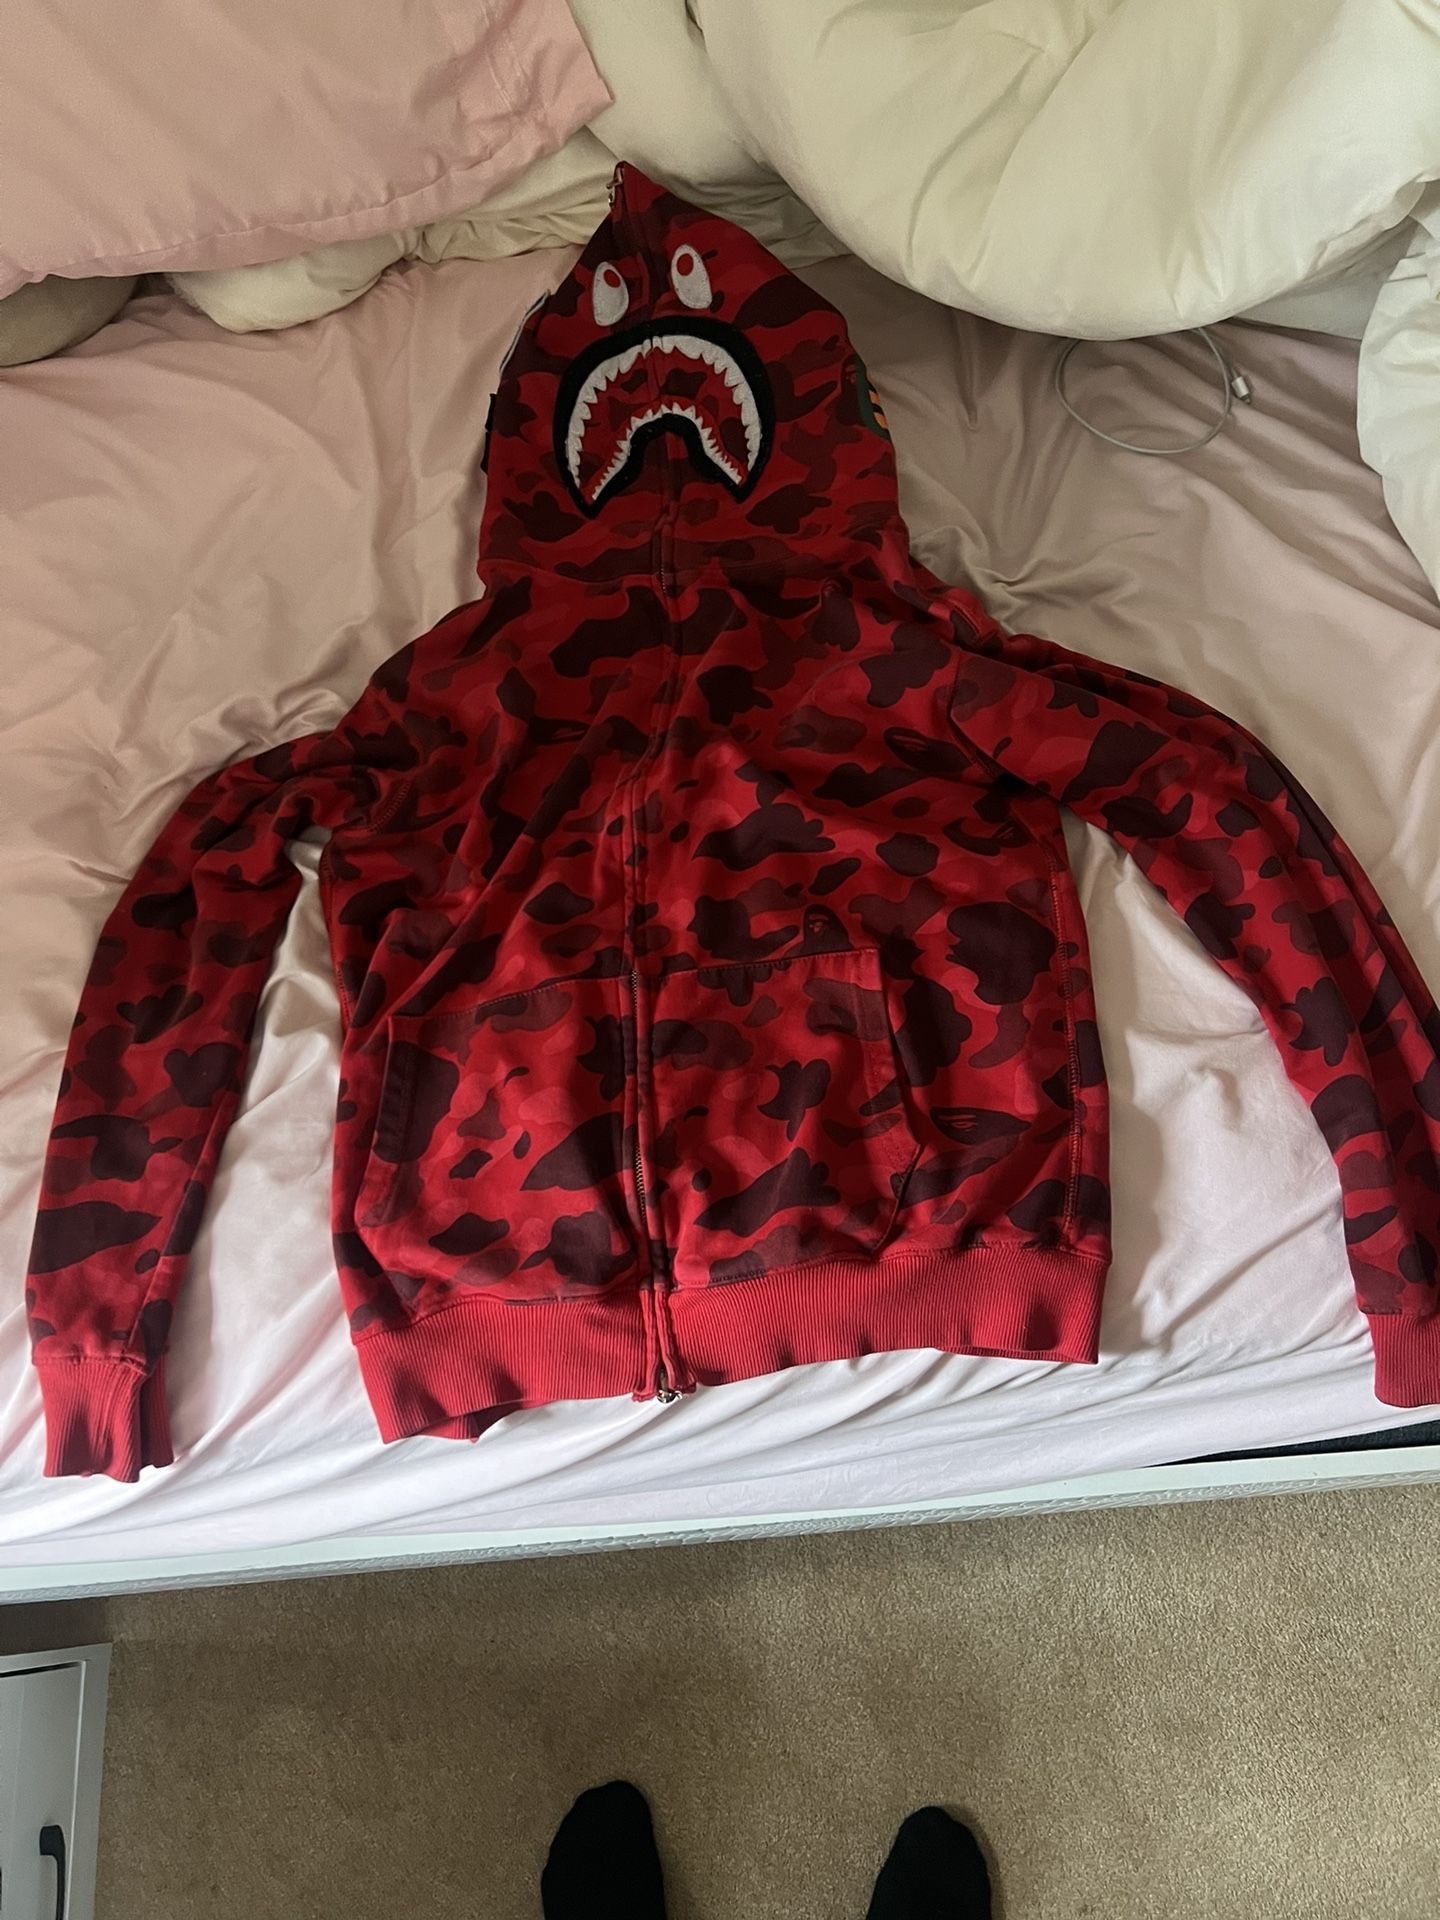 RED BAPE HOODIE SLIGHTLY WORN, DOWN FOR TRADES